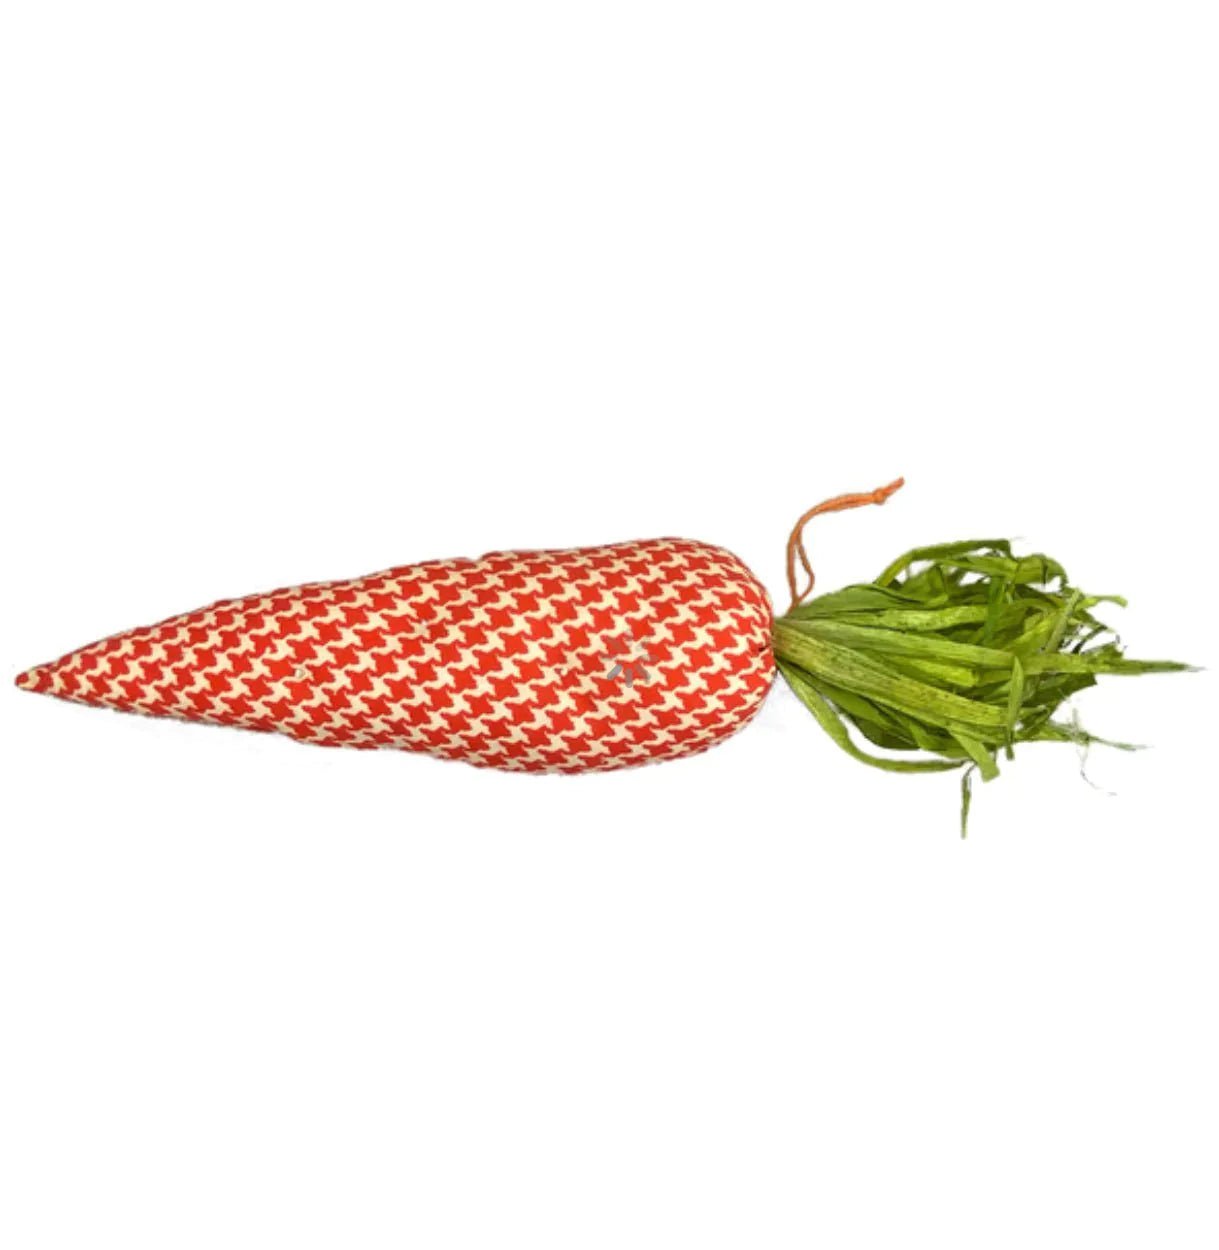 Large Houndstooth Carrot - Greenery MarketWreath attachments63133OR